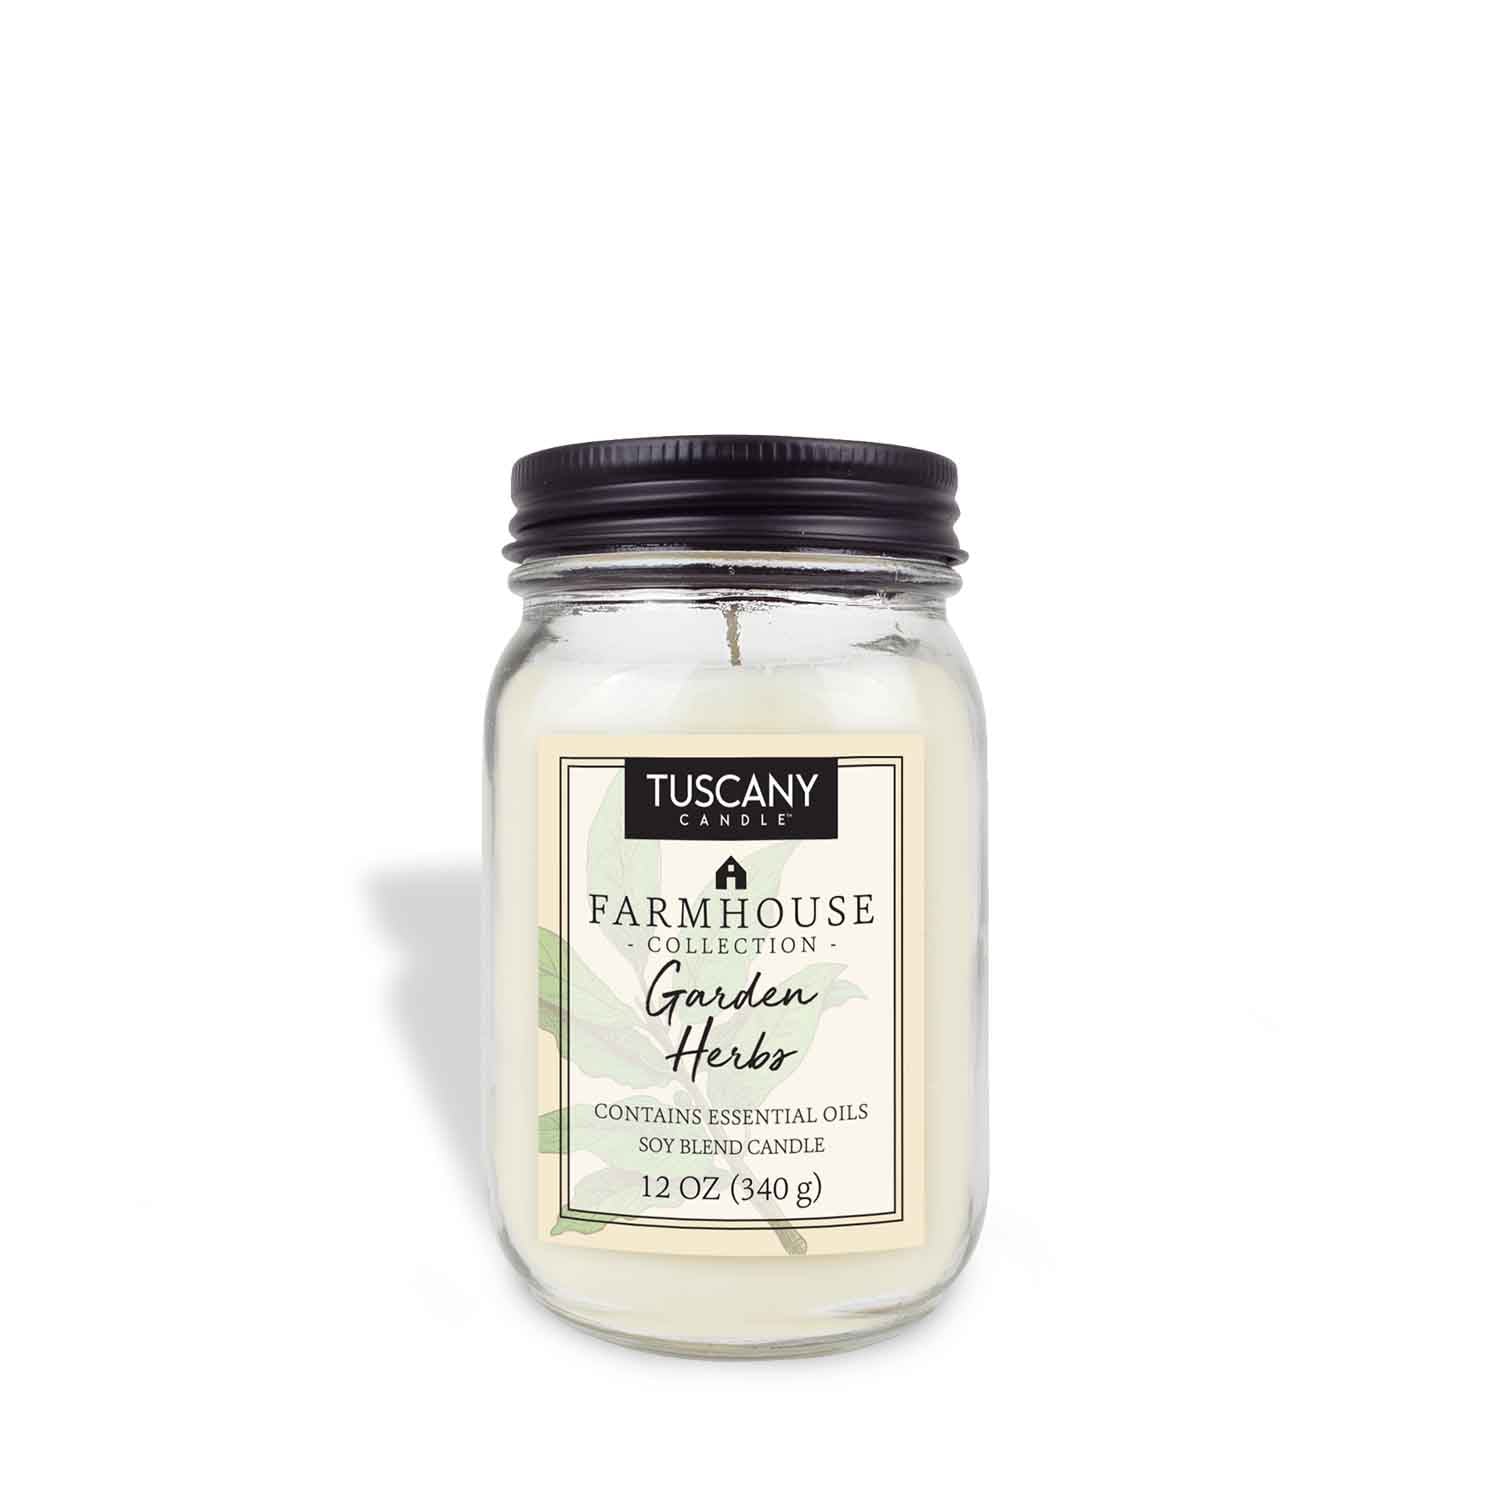 A jar with a Garden Herbs Scented Jar Candle (12 oz) - Farmhouse Collection by Tuscany Candle on a white background.